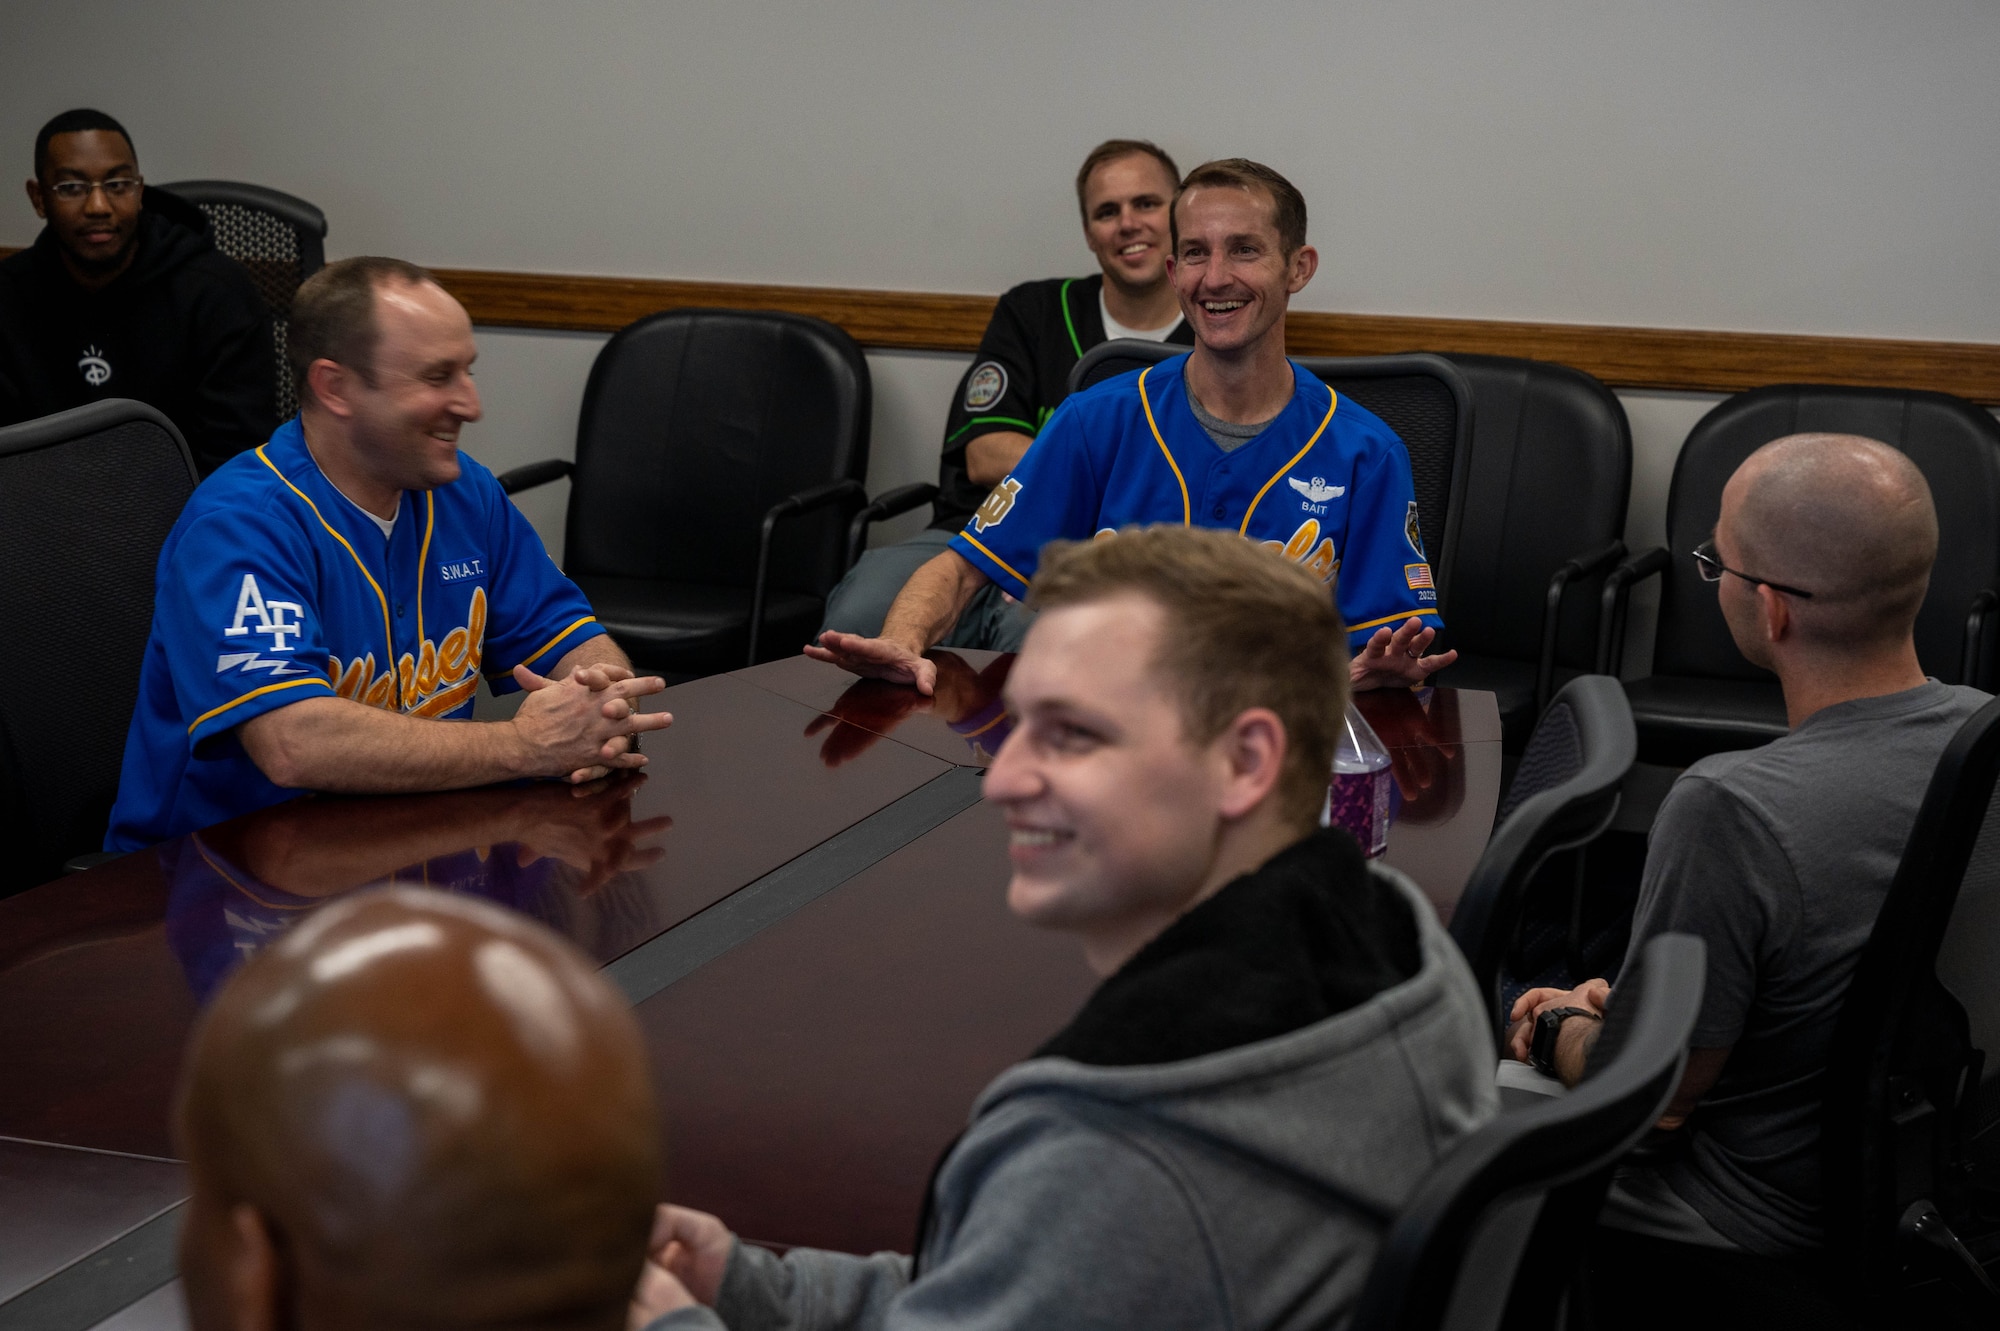 A group of people sitting around a conference table laughing.